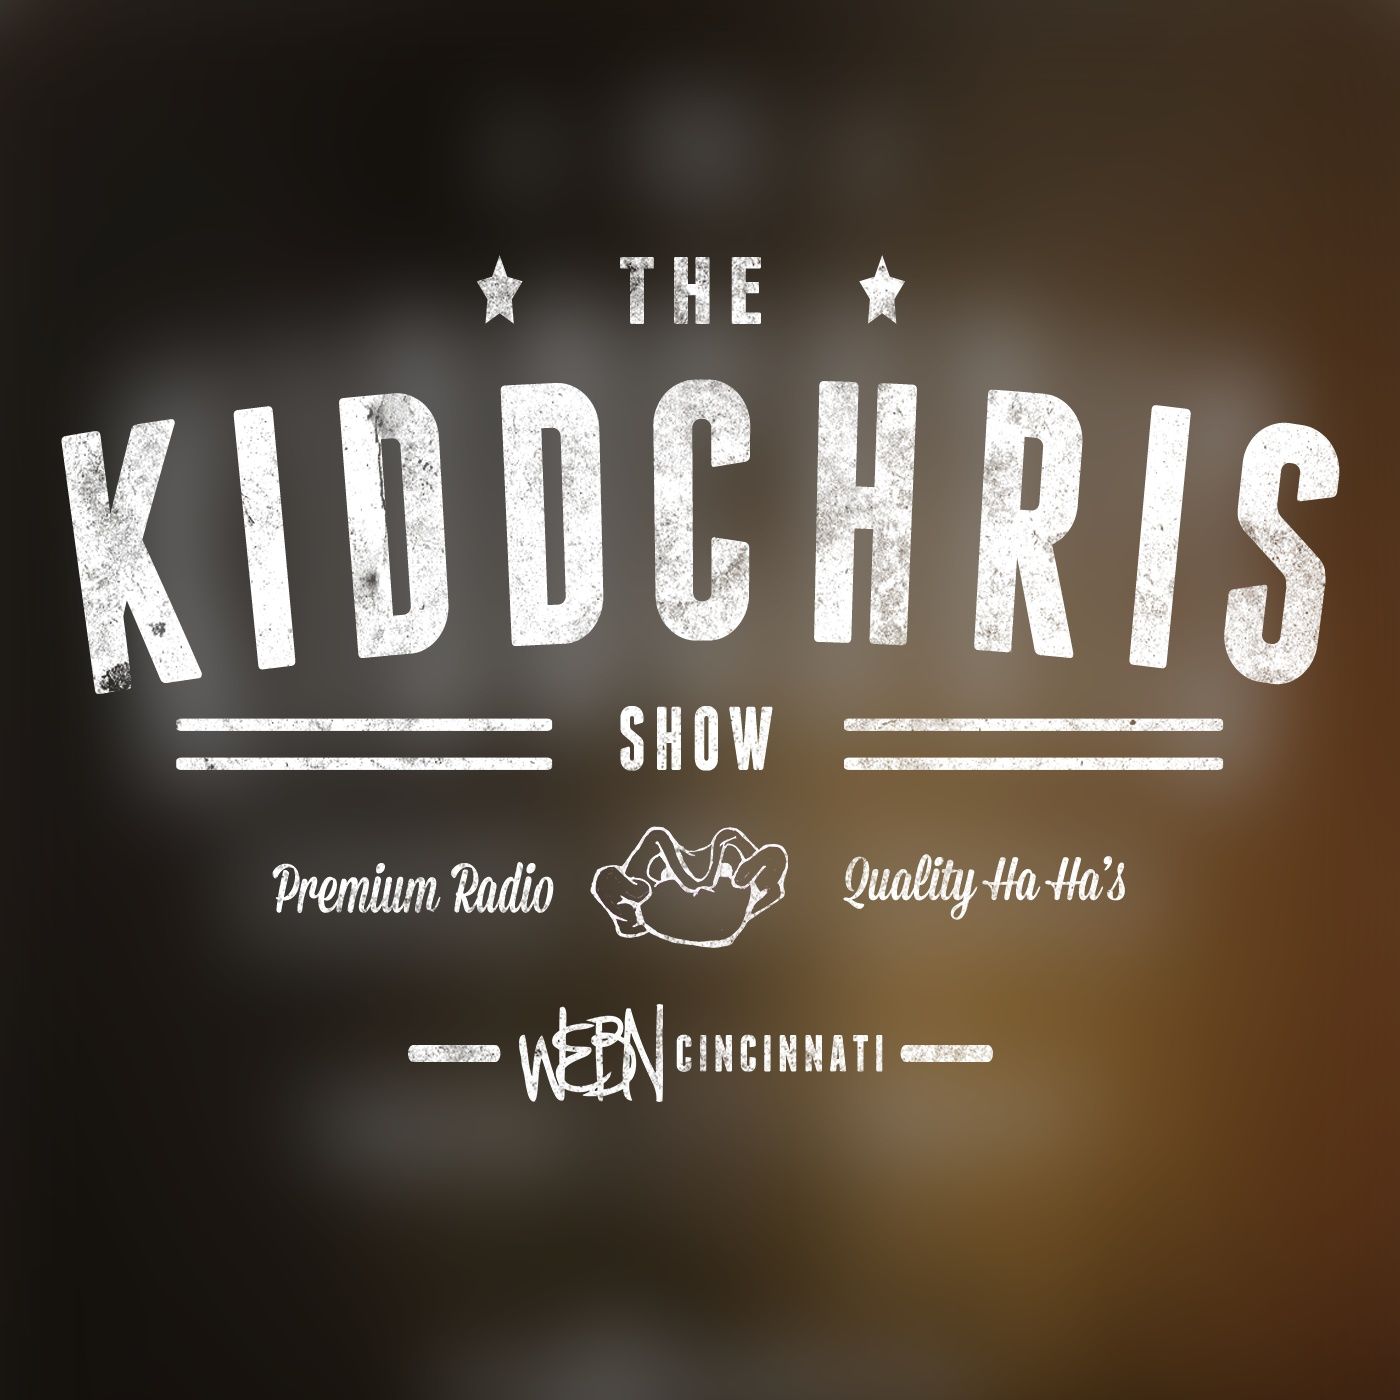 The KiddChris Show